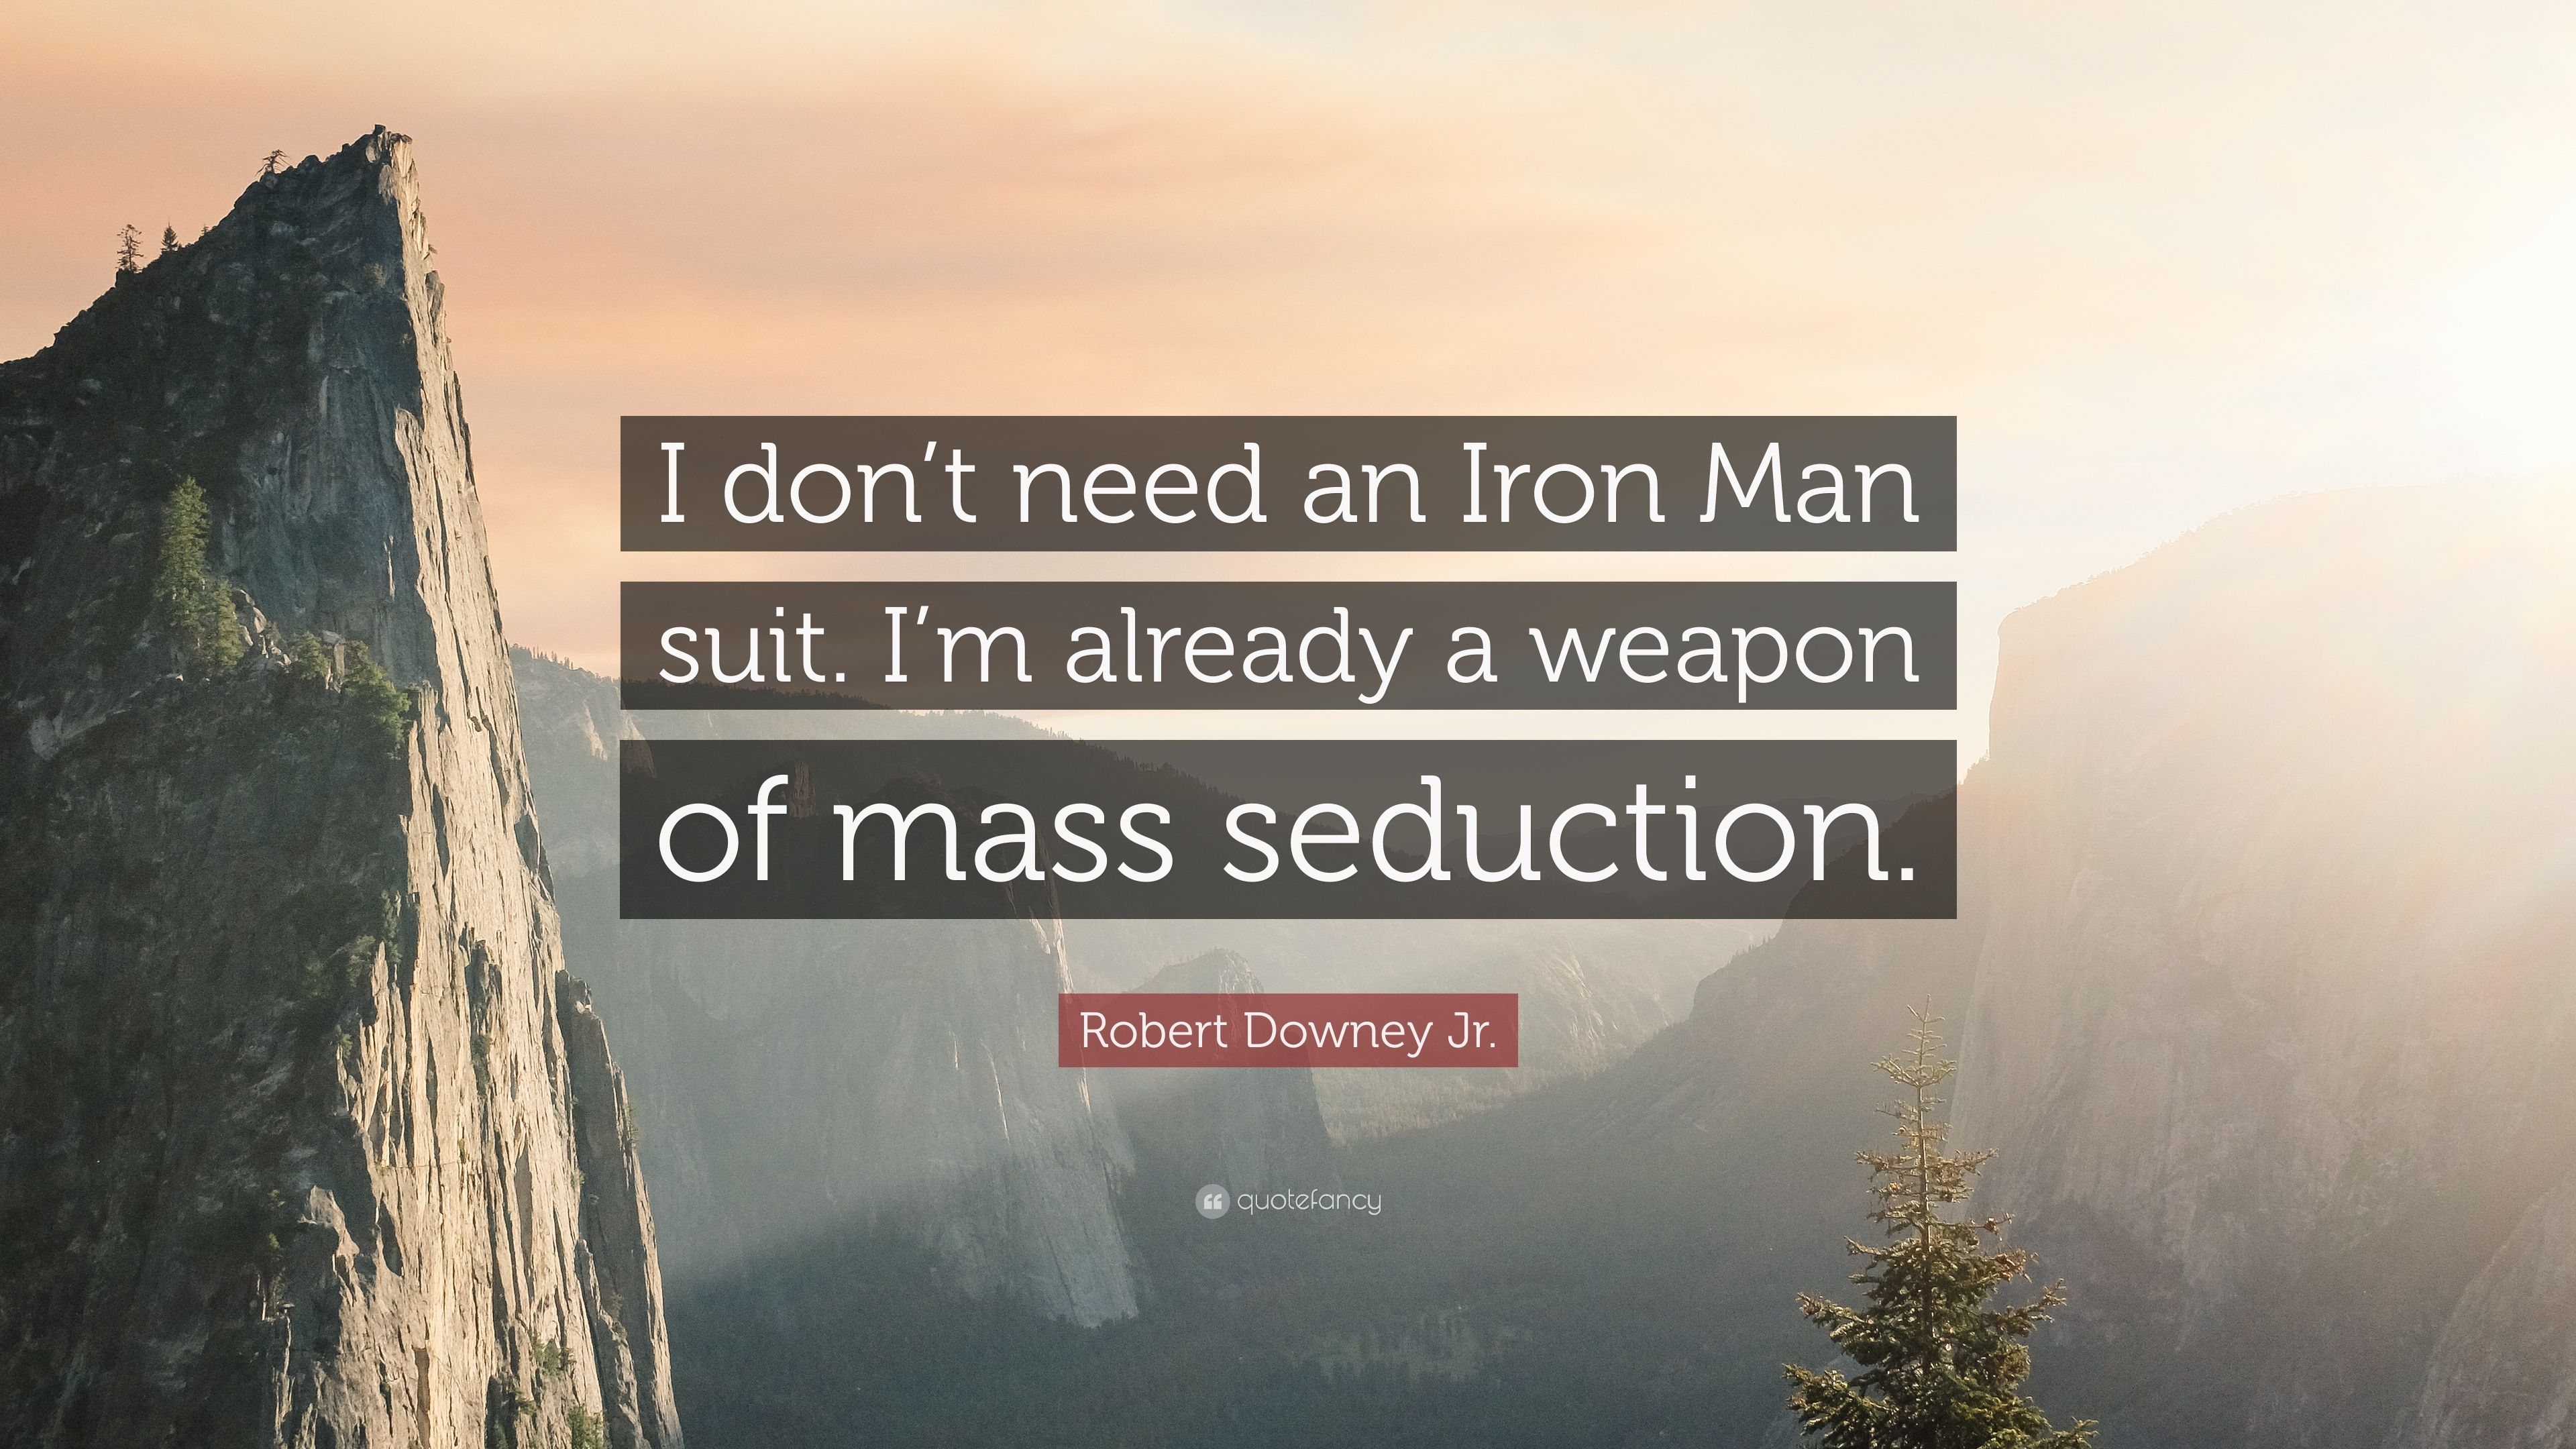 Robert Downey Jr. Quote: “I don't need an Iron Man suit. I'm